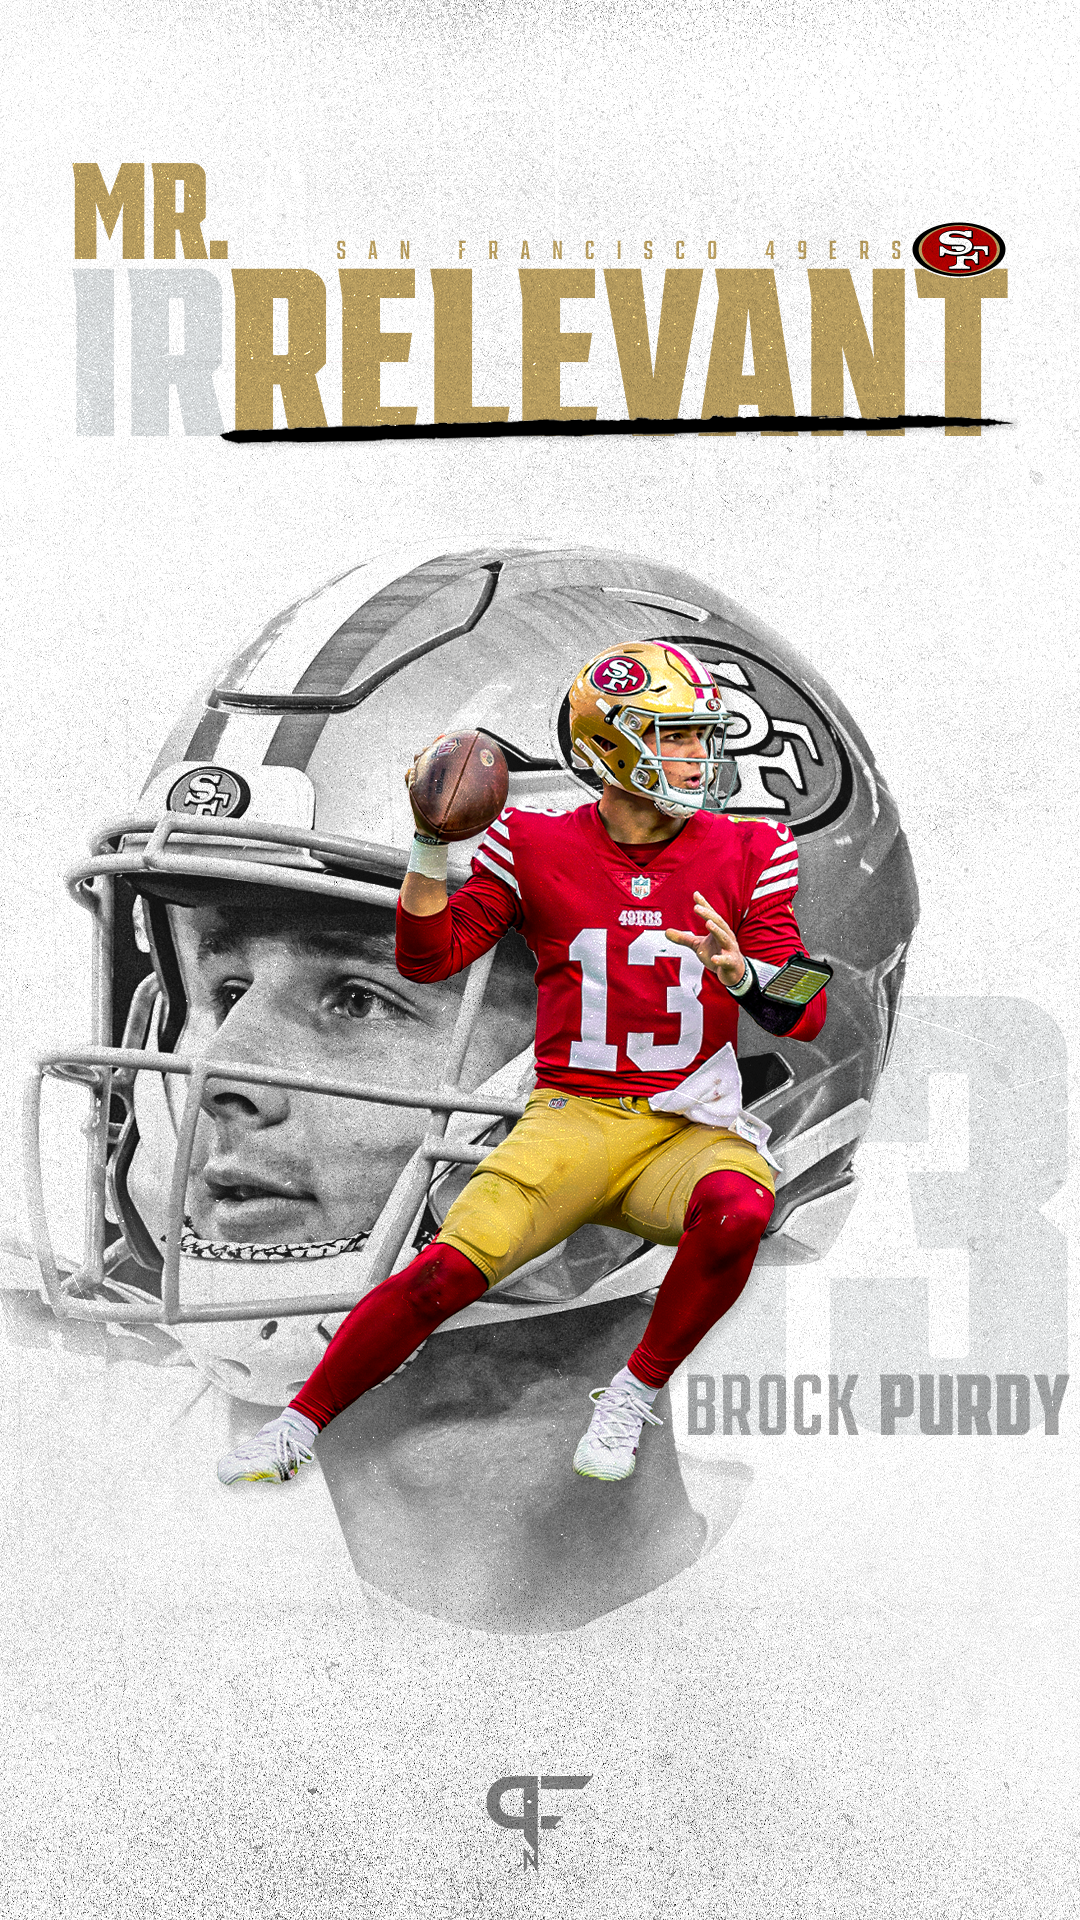 This is a Brock Purdy wallpaper designed for cell phones. The text says 